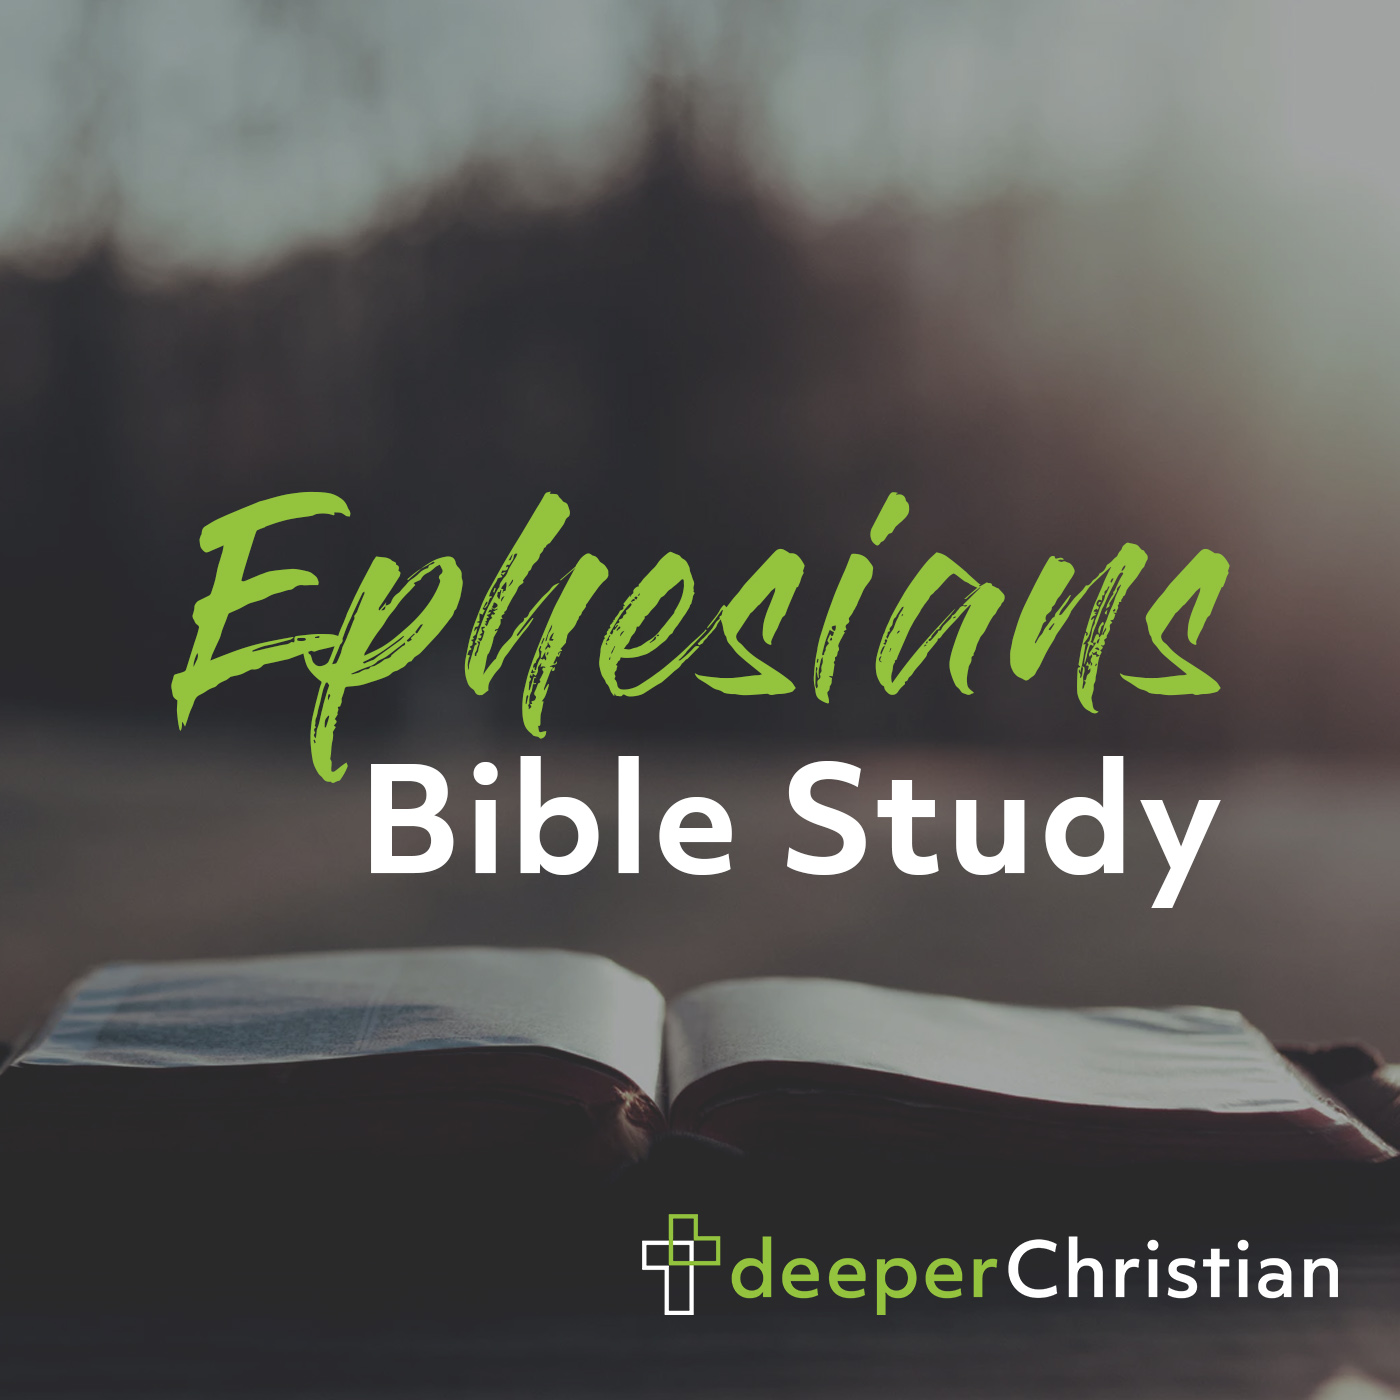 Artwork for podcast Deeper Christian Bible Study in Ephesians